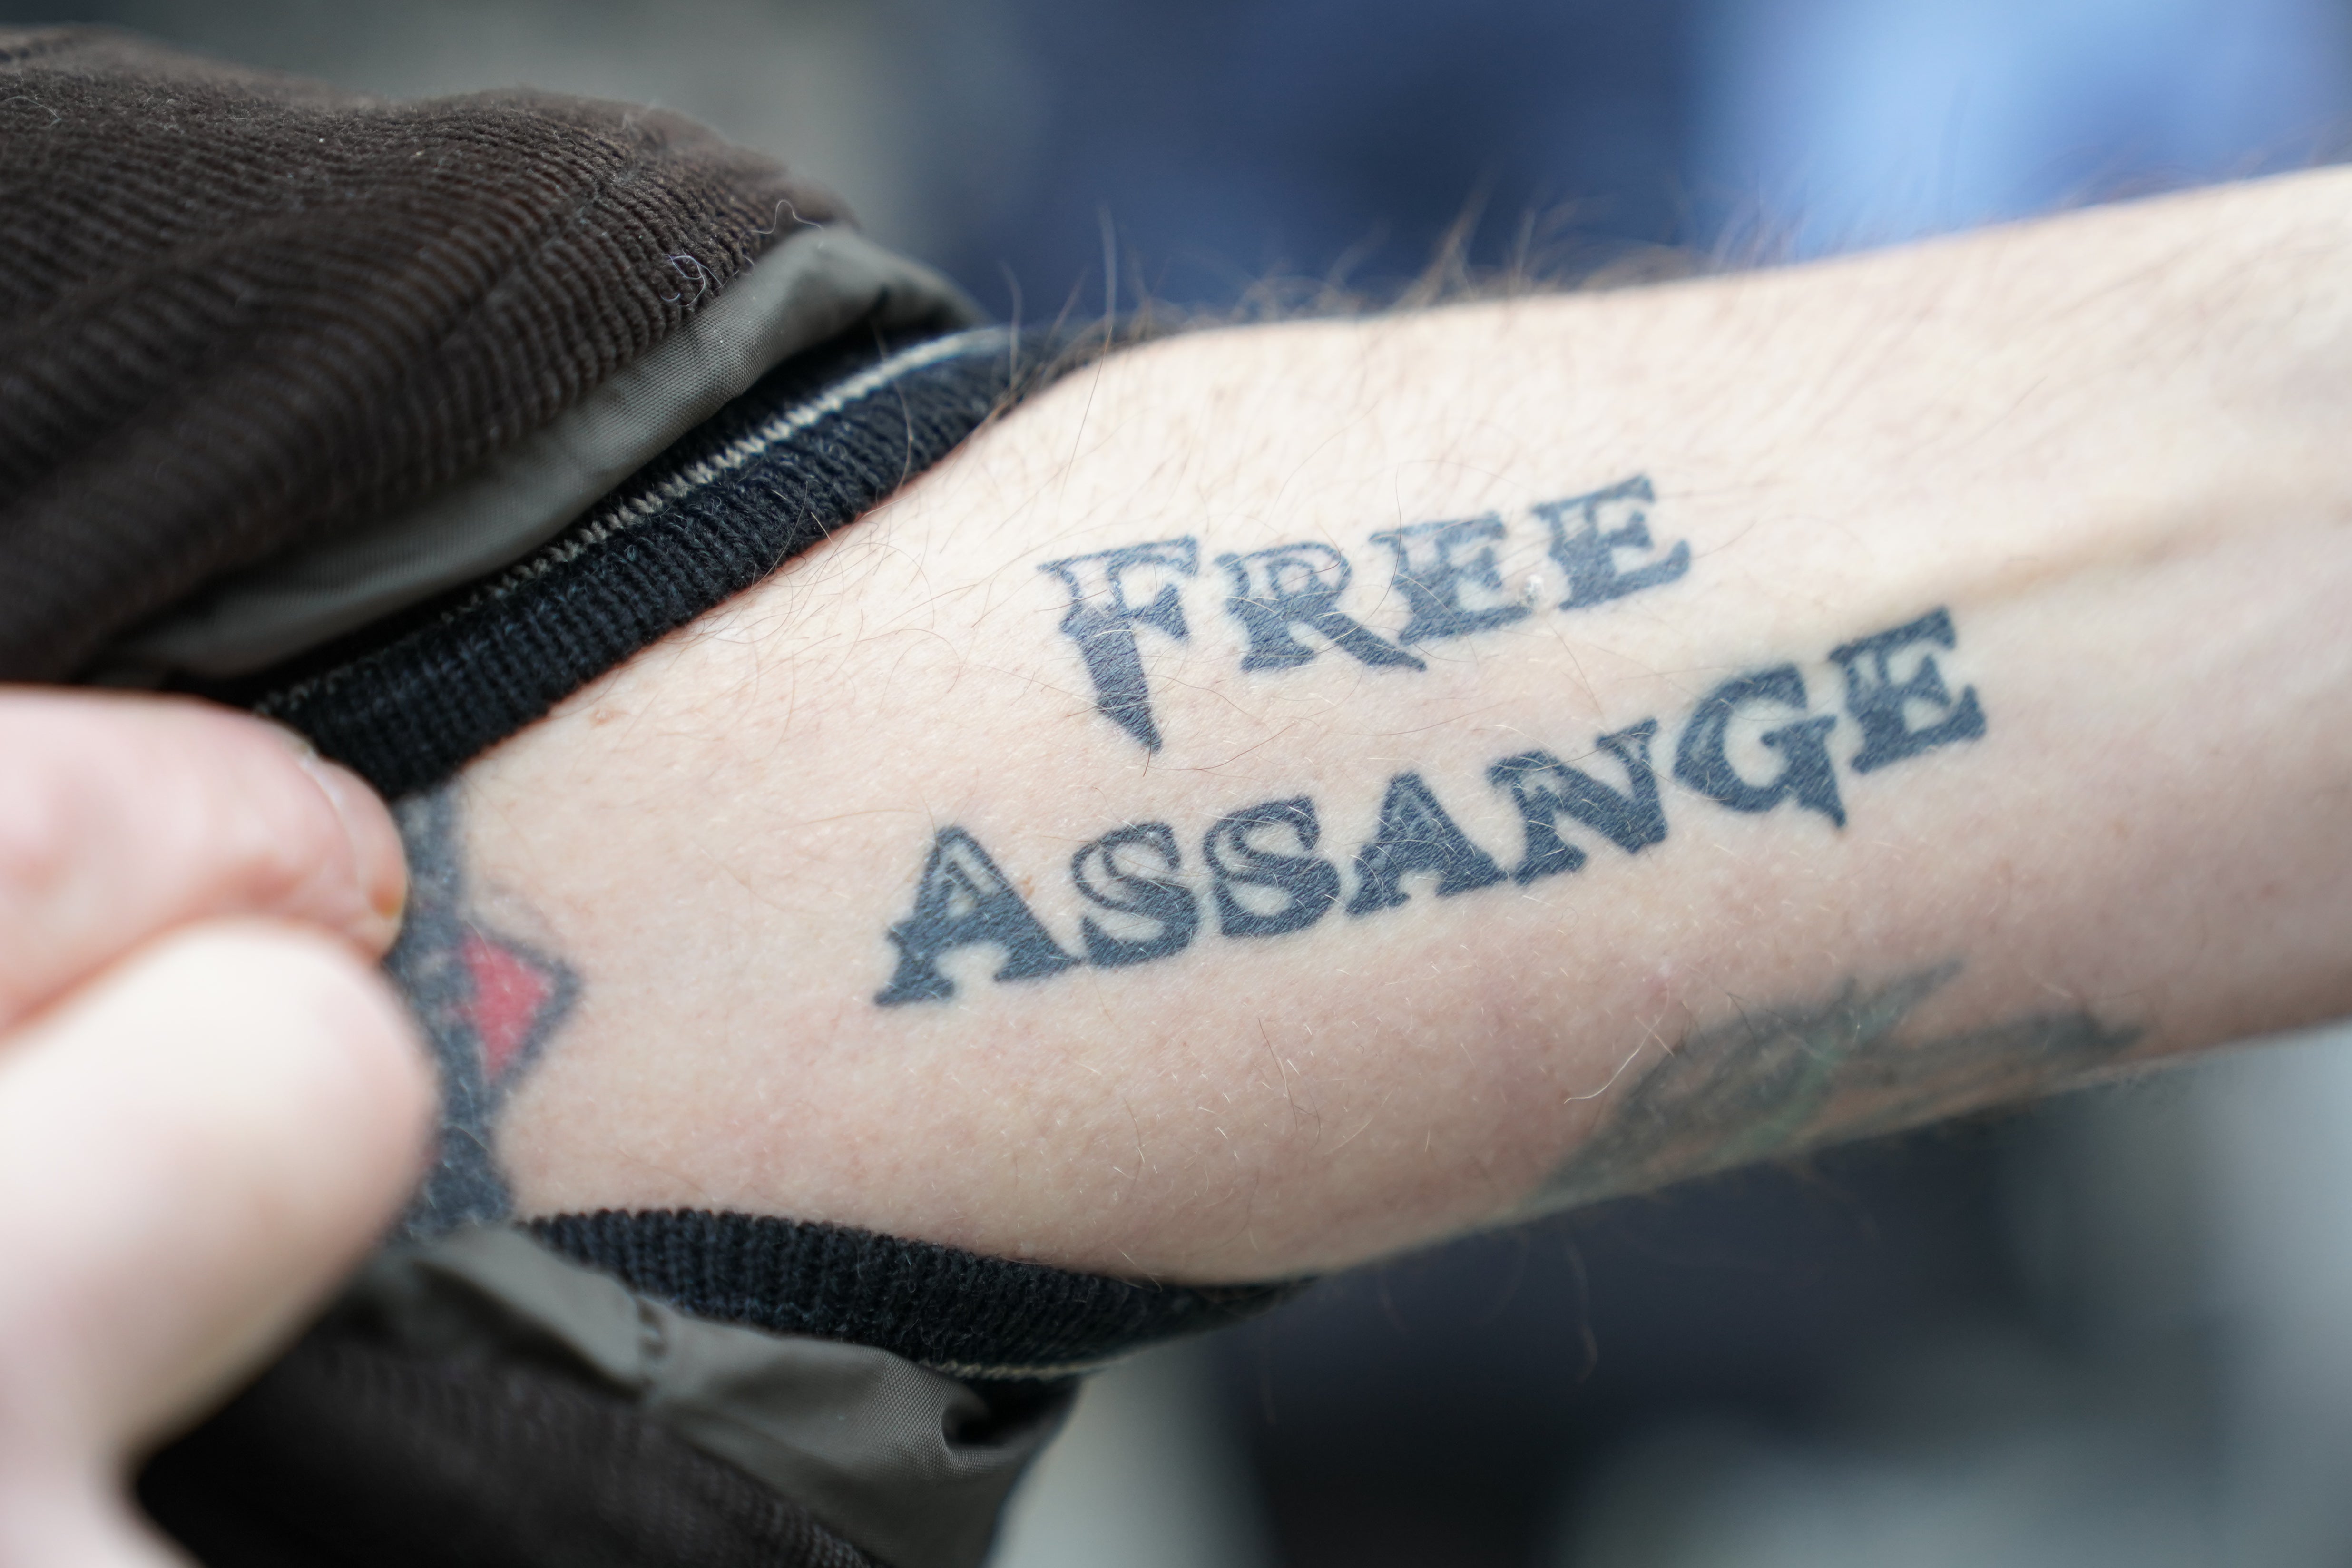 A tattoo on an arm showing Julian Assange’s name outside the Royal Courts of Justice in London (Kirsty O’Connor/PA)